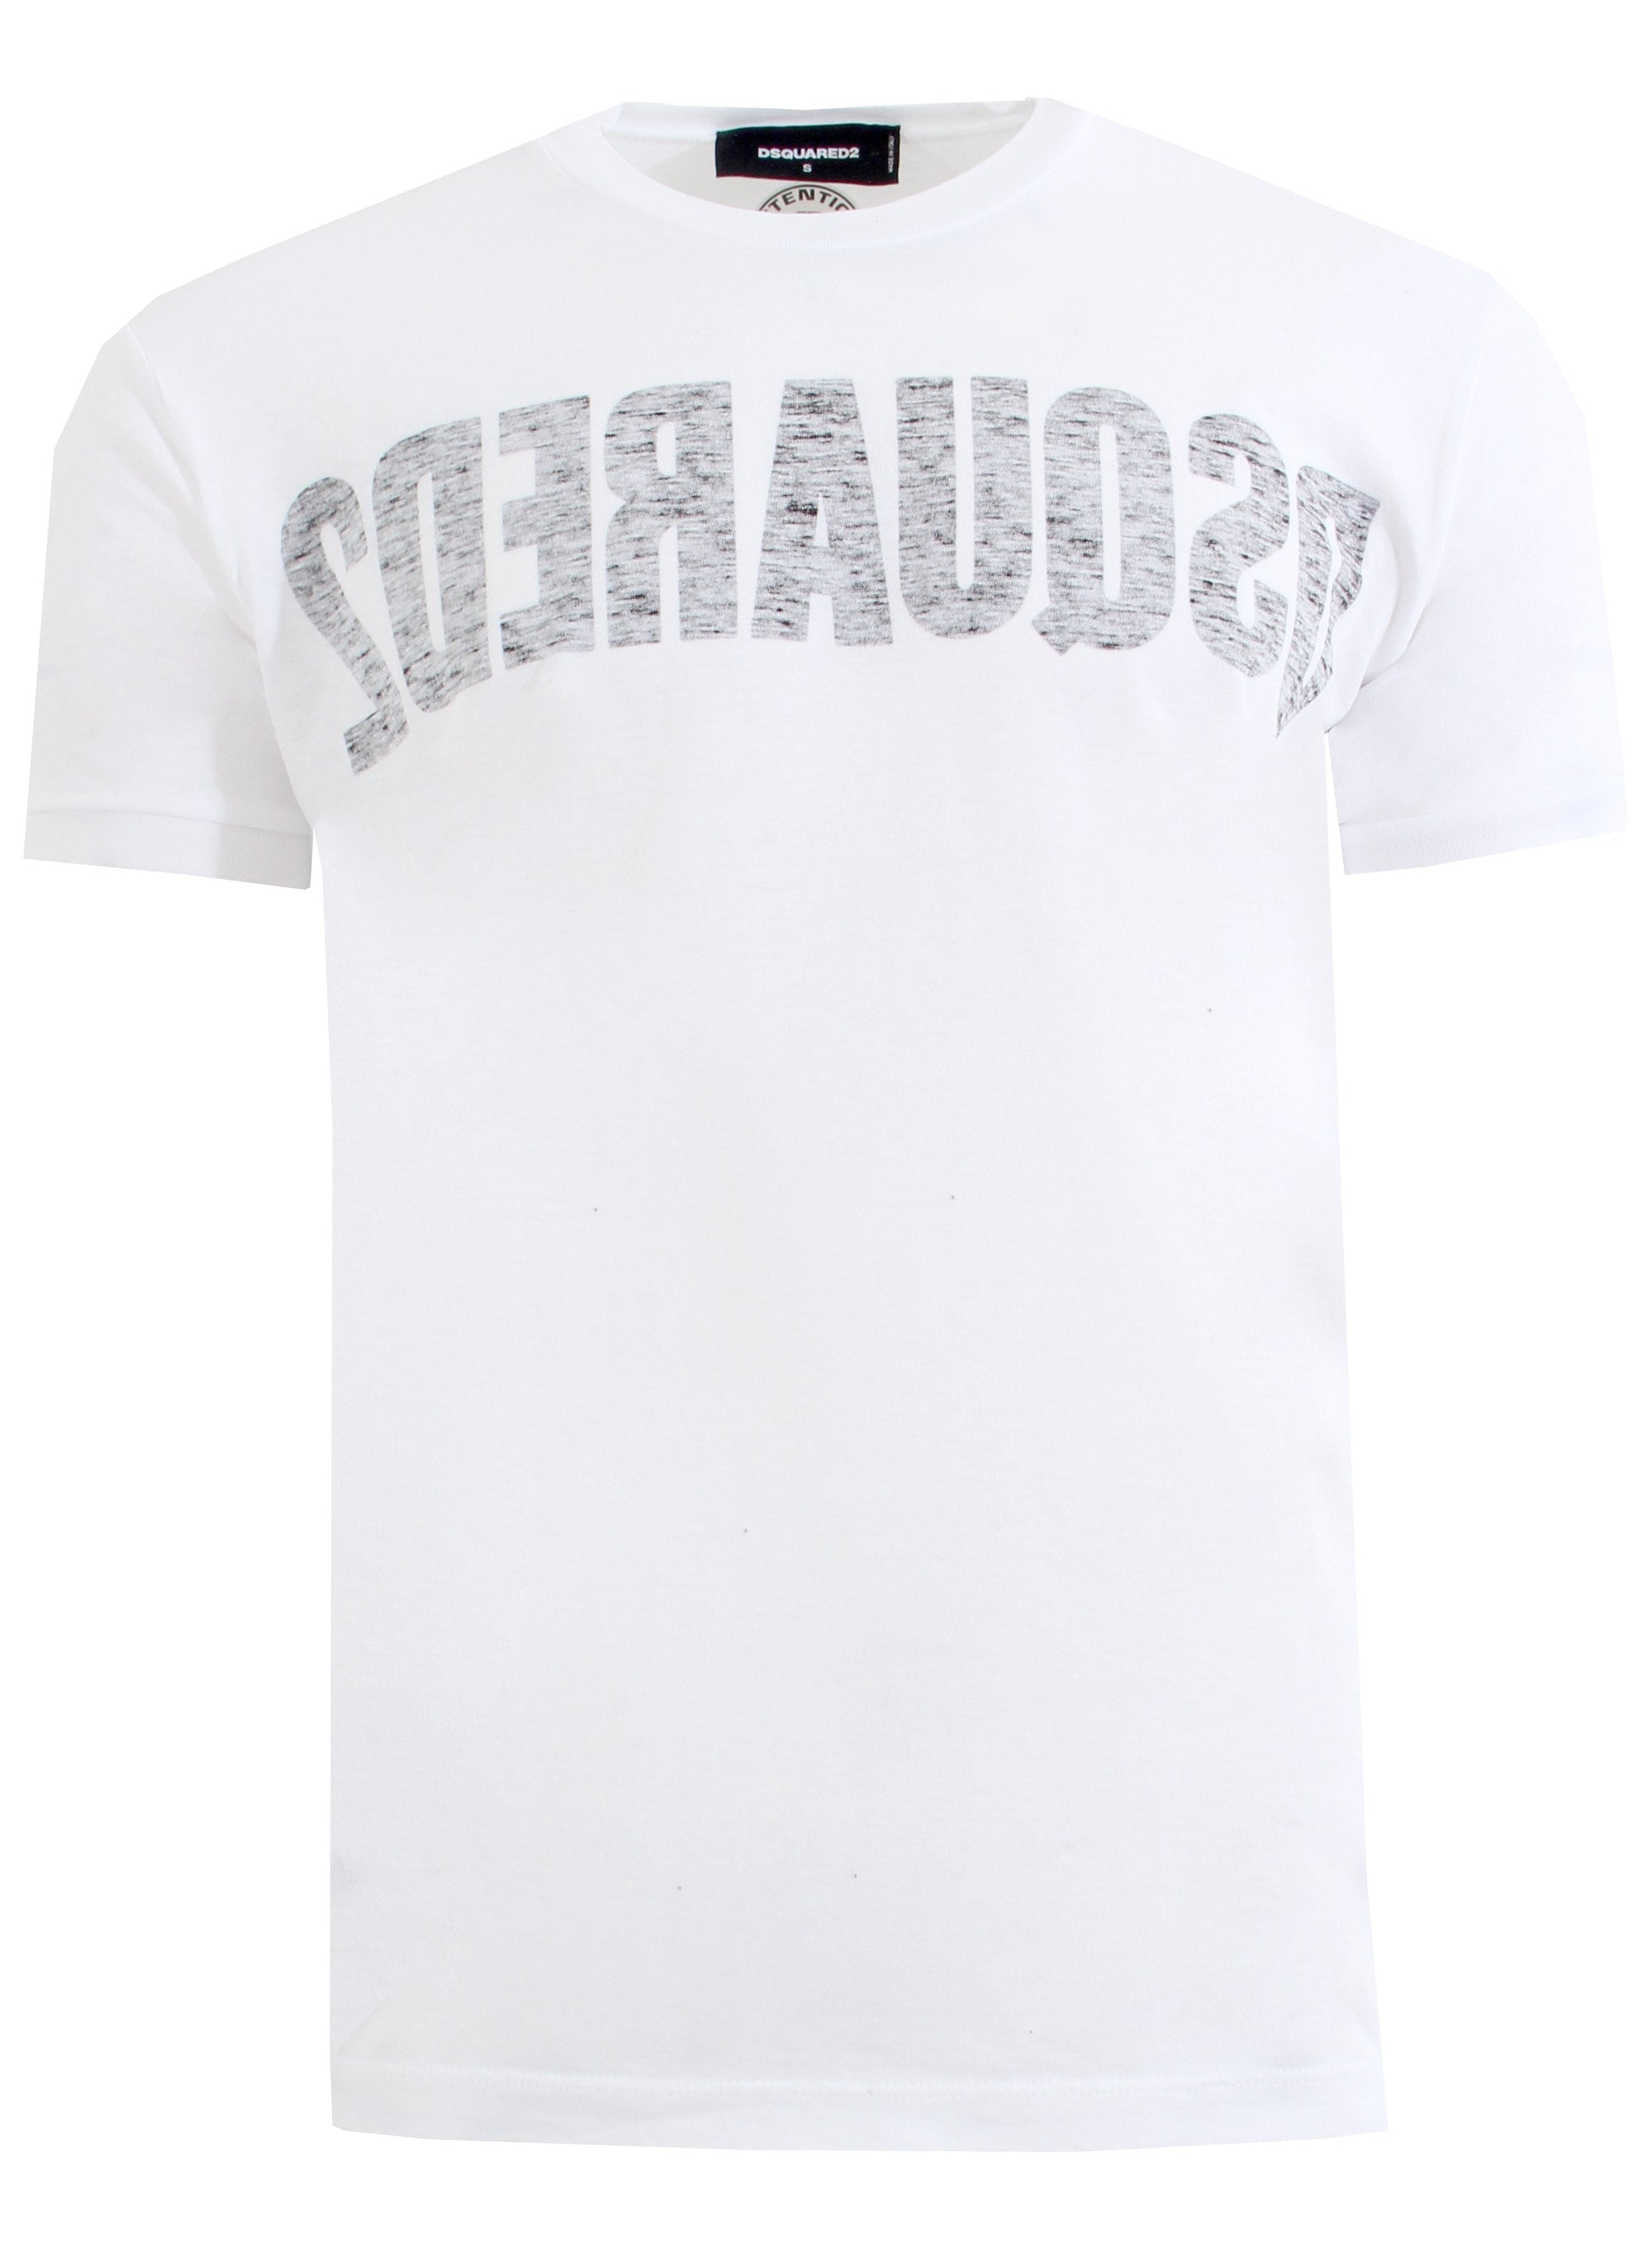 Inside Out T-shirt - White